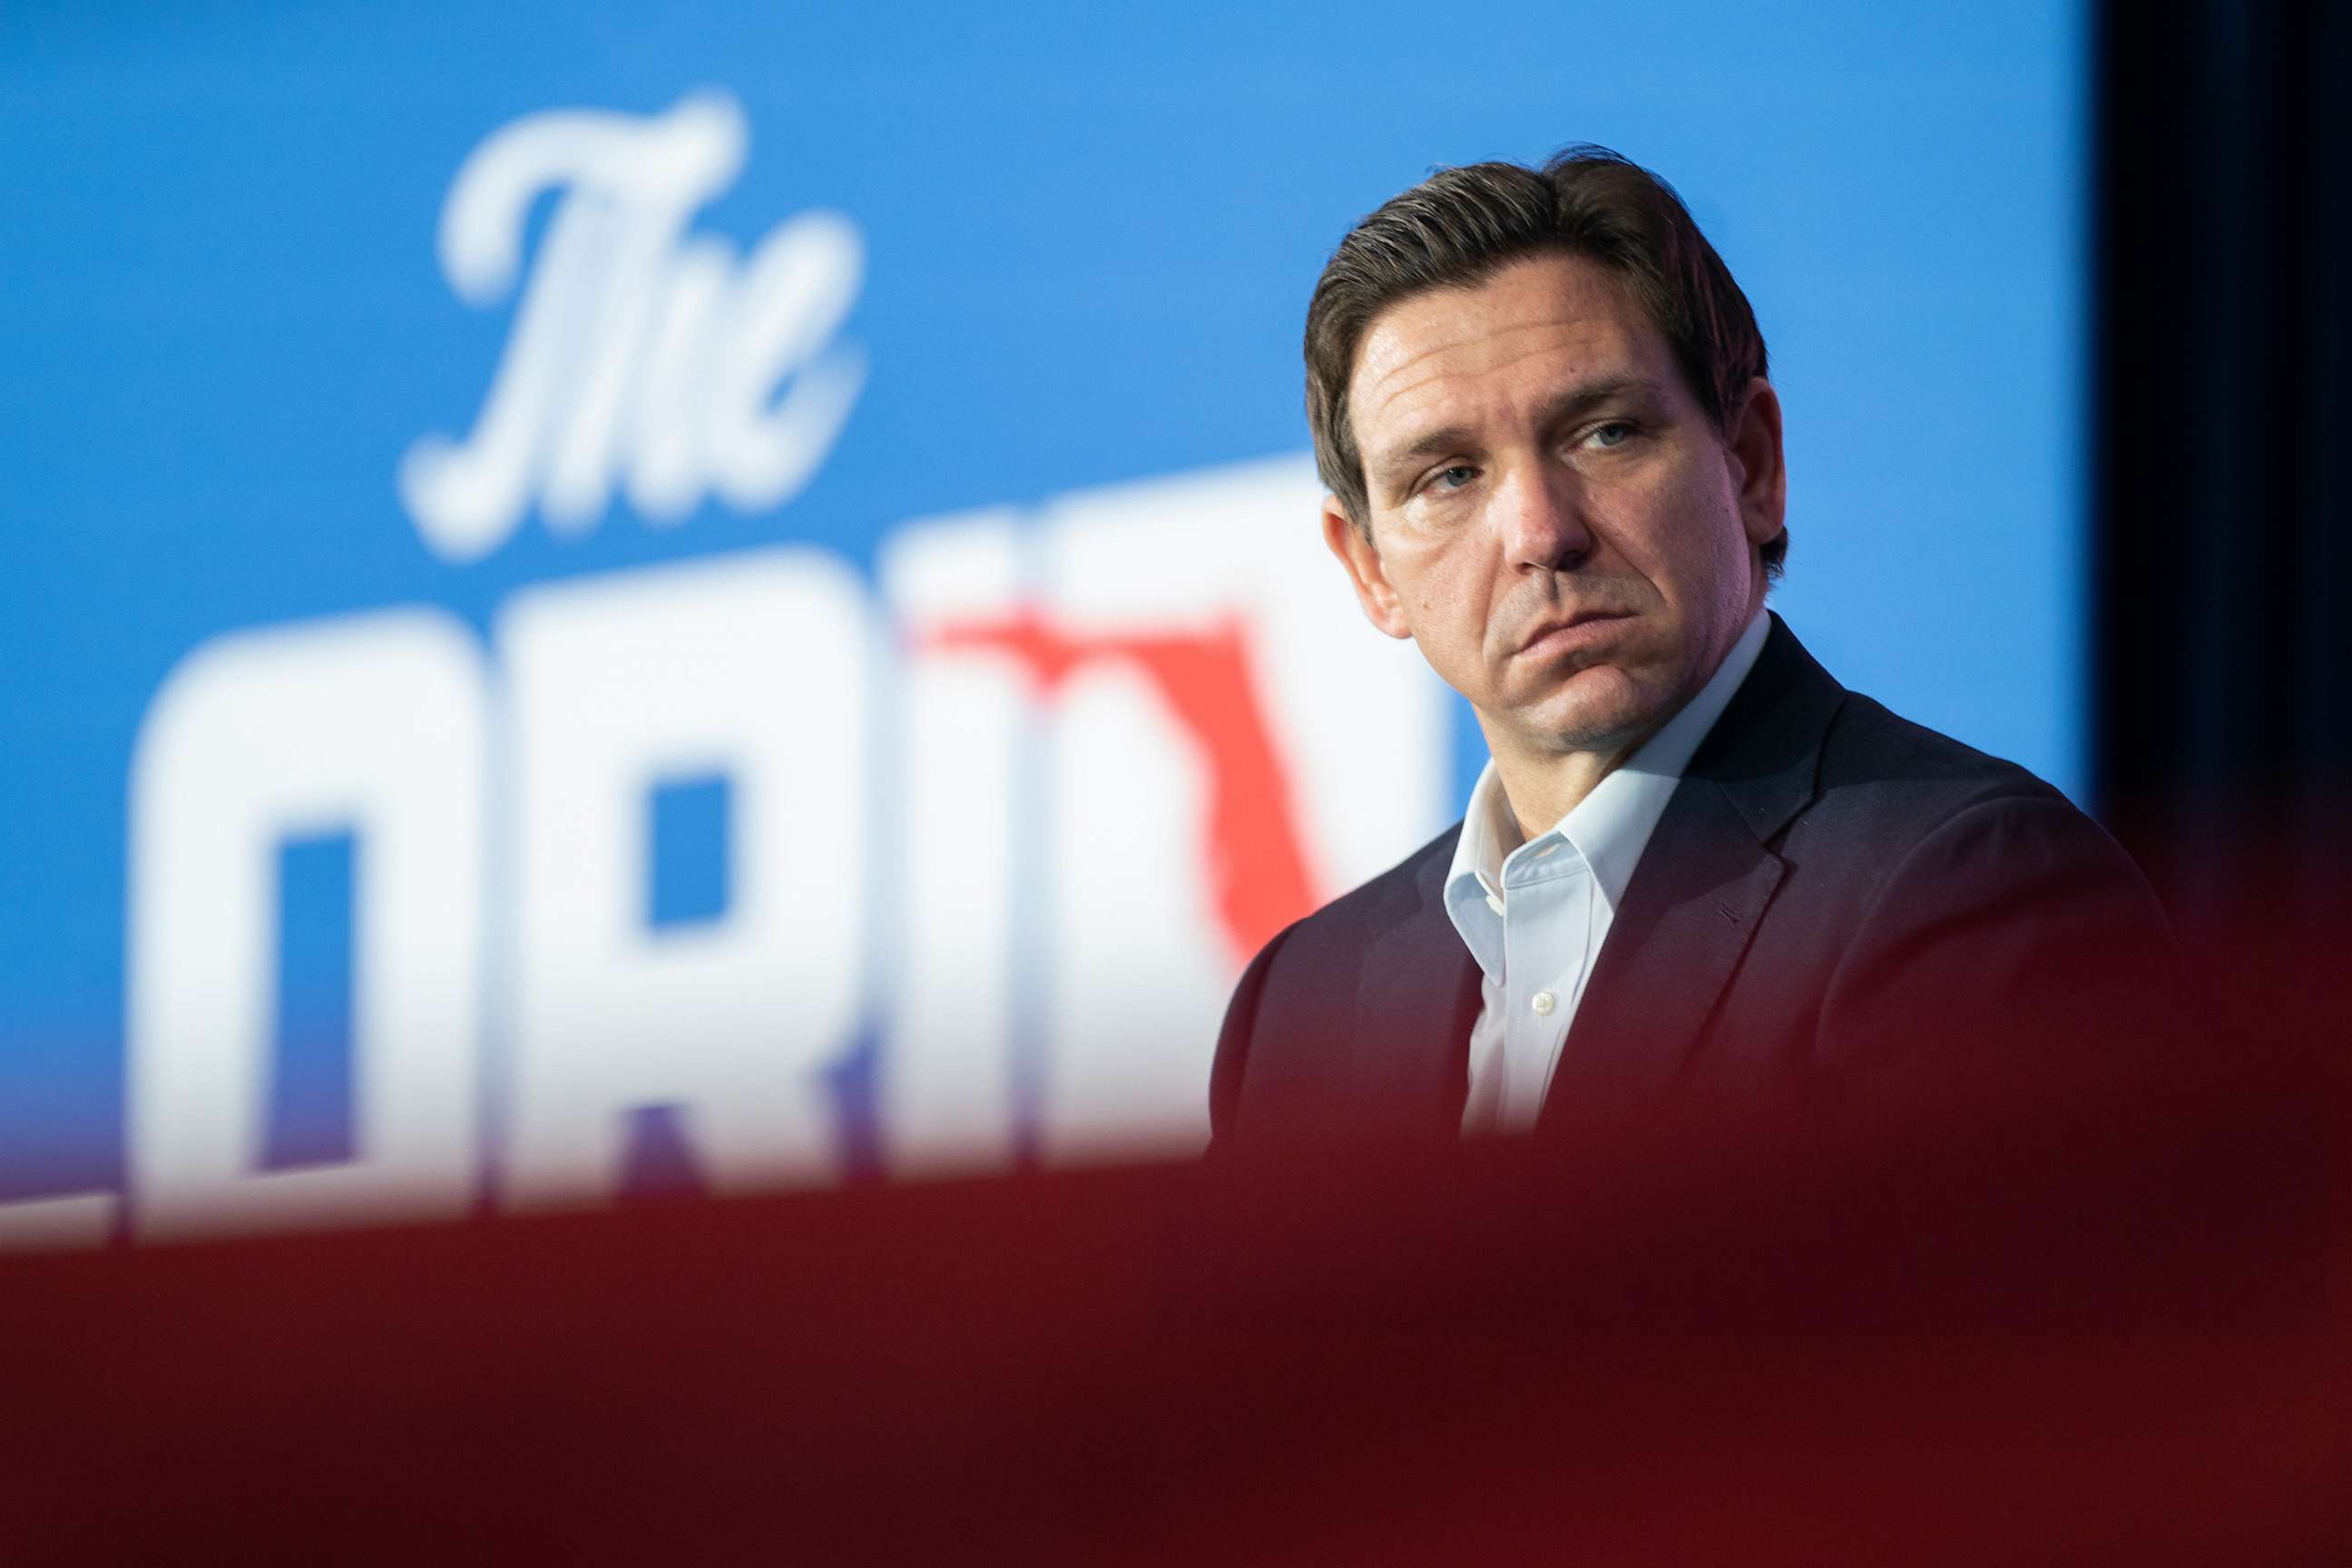 PHOTO: Florida Governor Ron DeSantis speaks to a crowd at the North Charleston Coliseum, April 19, 2023 in North Charleston, S.C.